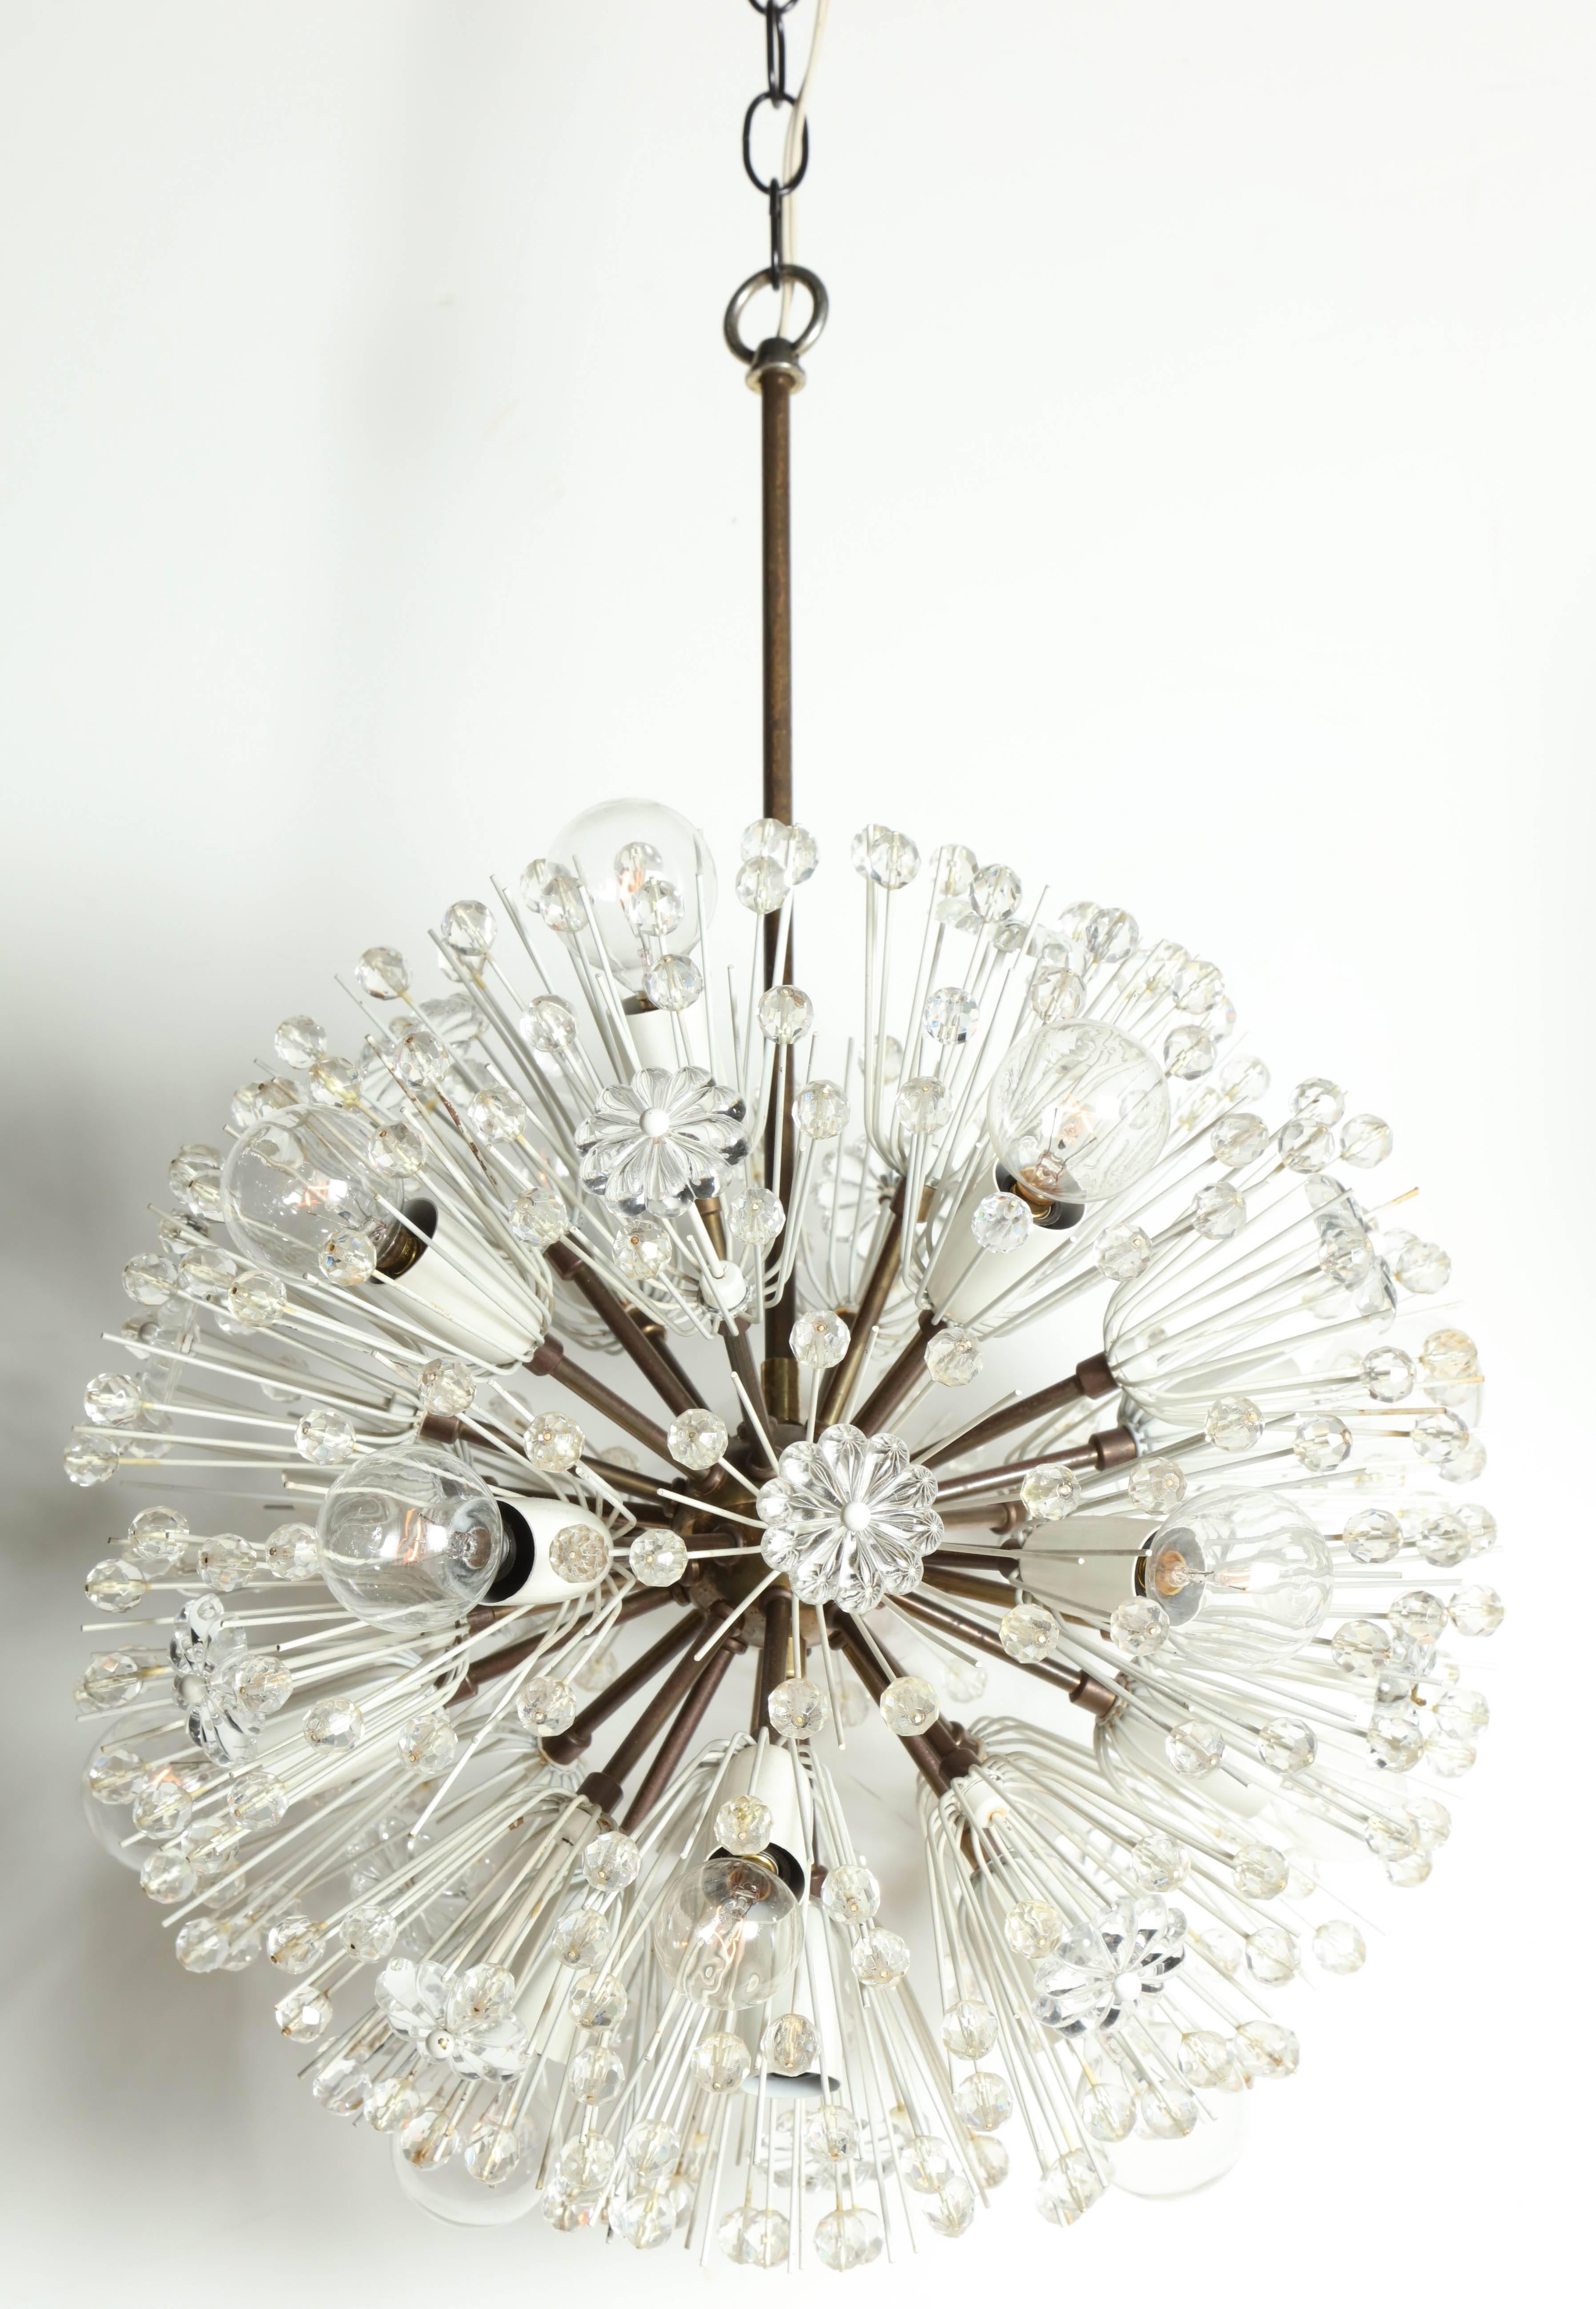 European Modern Emil Stejnar for Rupert Nikoll Hand Cut Crystal Sputnik Chandelier. Featuring a suspended and looped Brass rod with interior, spherical Brass Sputnik form with original patina, thin enameled posts, transparent hand crafted crystal